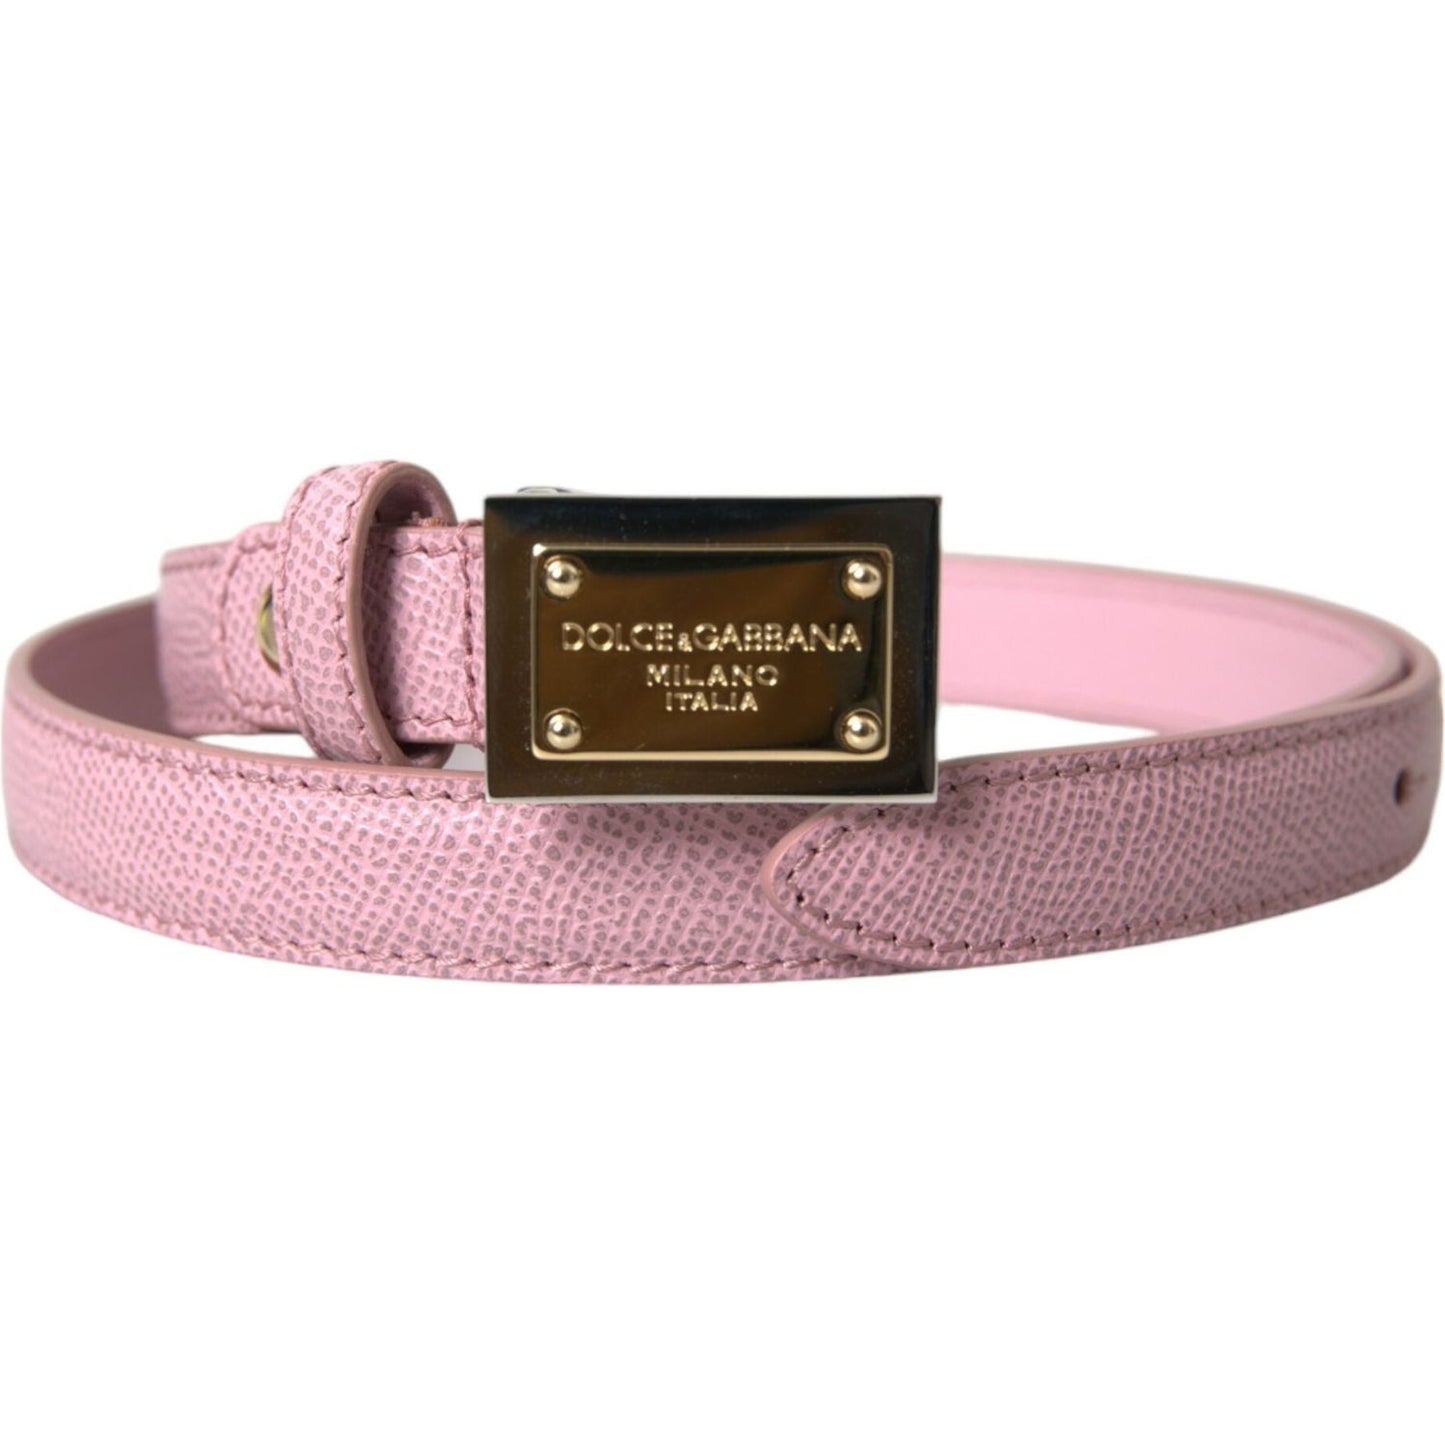 Dolce & Gabbana Pink Leather Gold Square Metal Buckle Belt pink-leather-gold-square-metal-buckle-belt